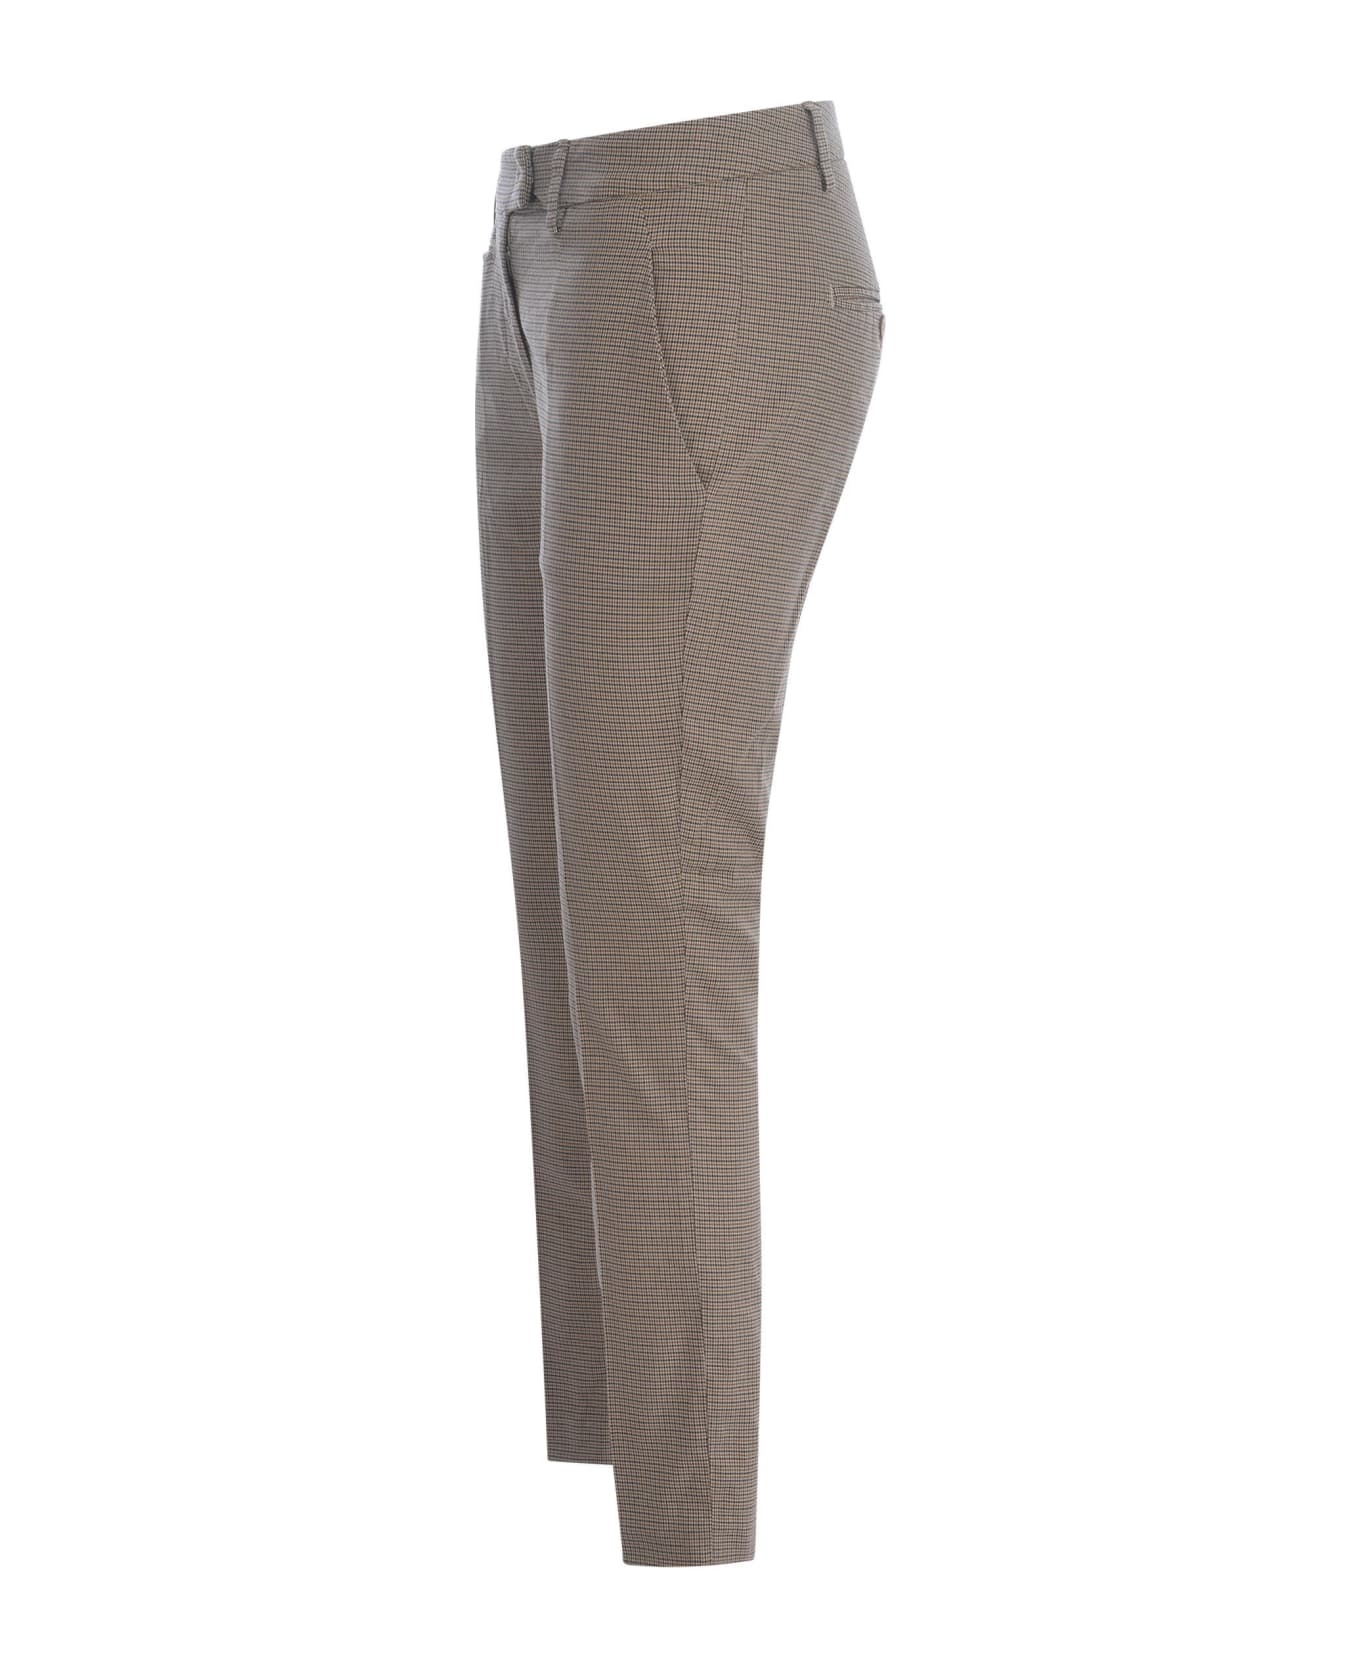 Dondup Trousers Dondup "perfect" In Houndstooth - Beige ボトムス